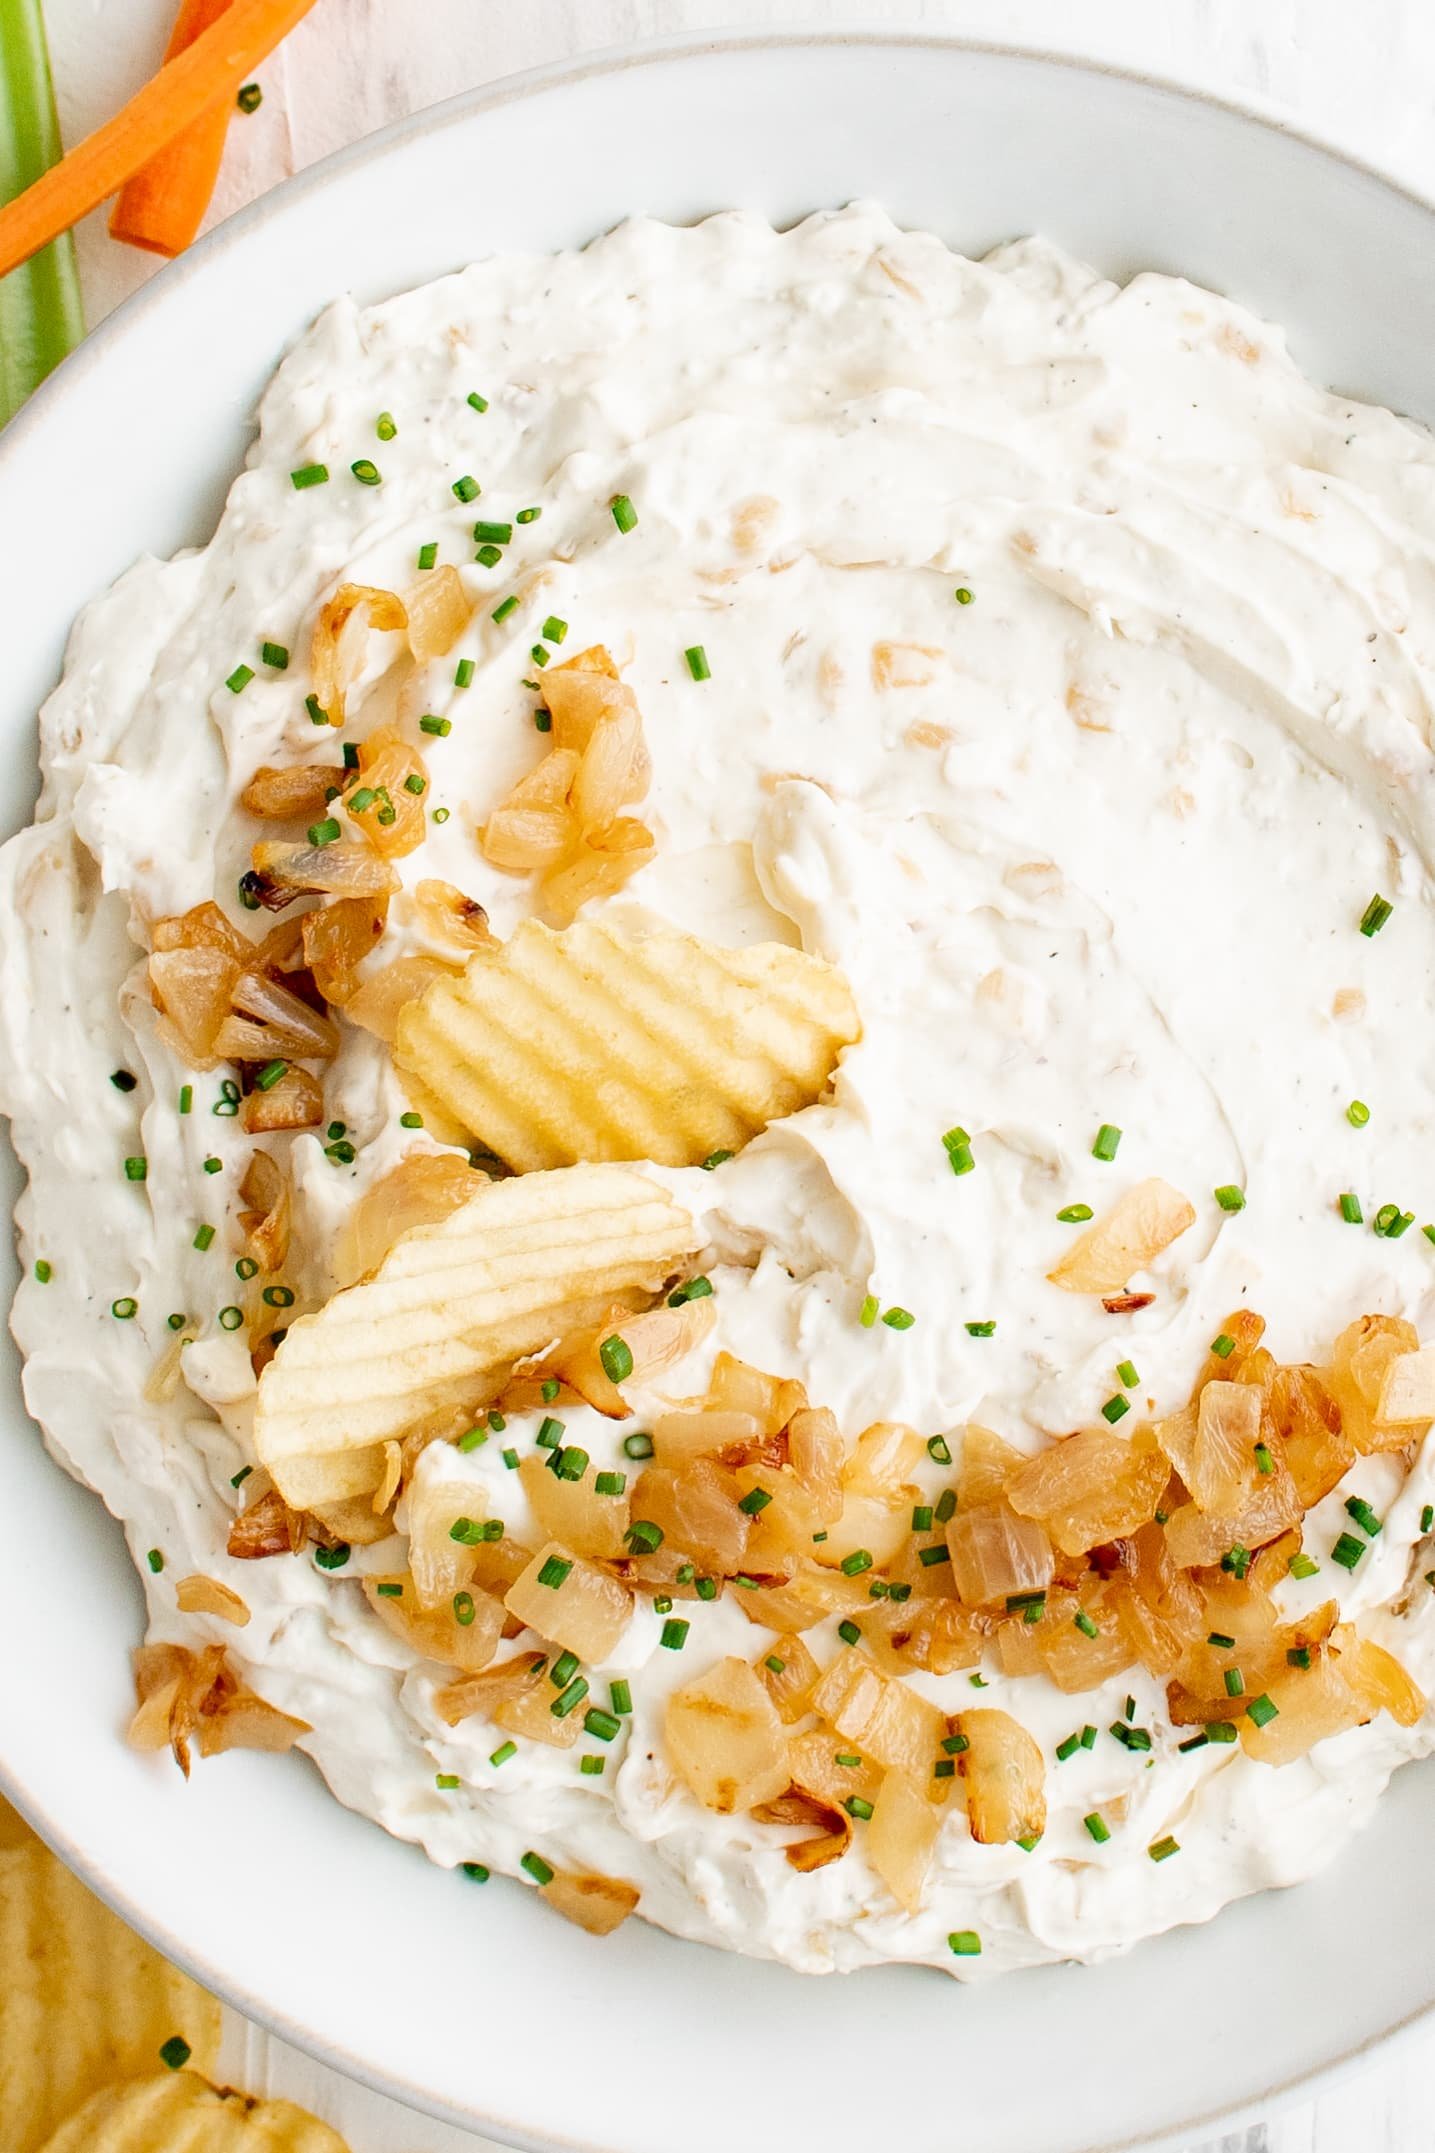 Large round white bowl filled with homemade French onion dip topped with golden caramelized onions and chopped chives.